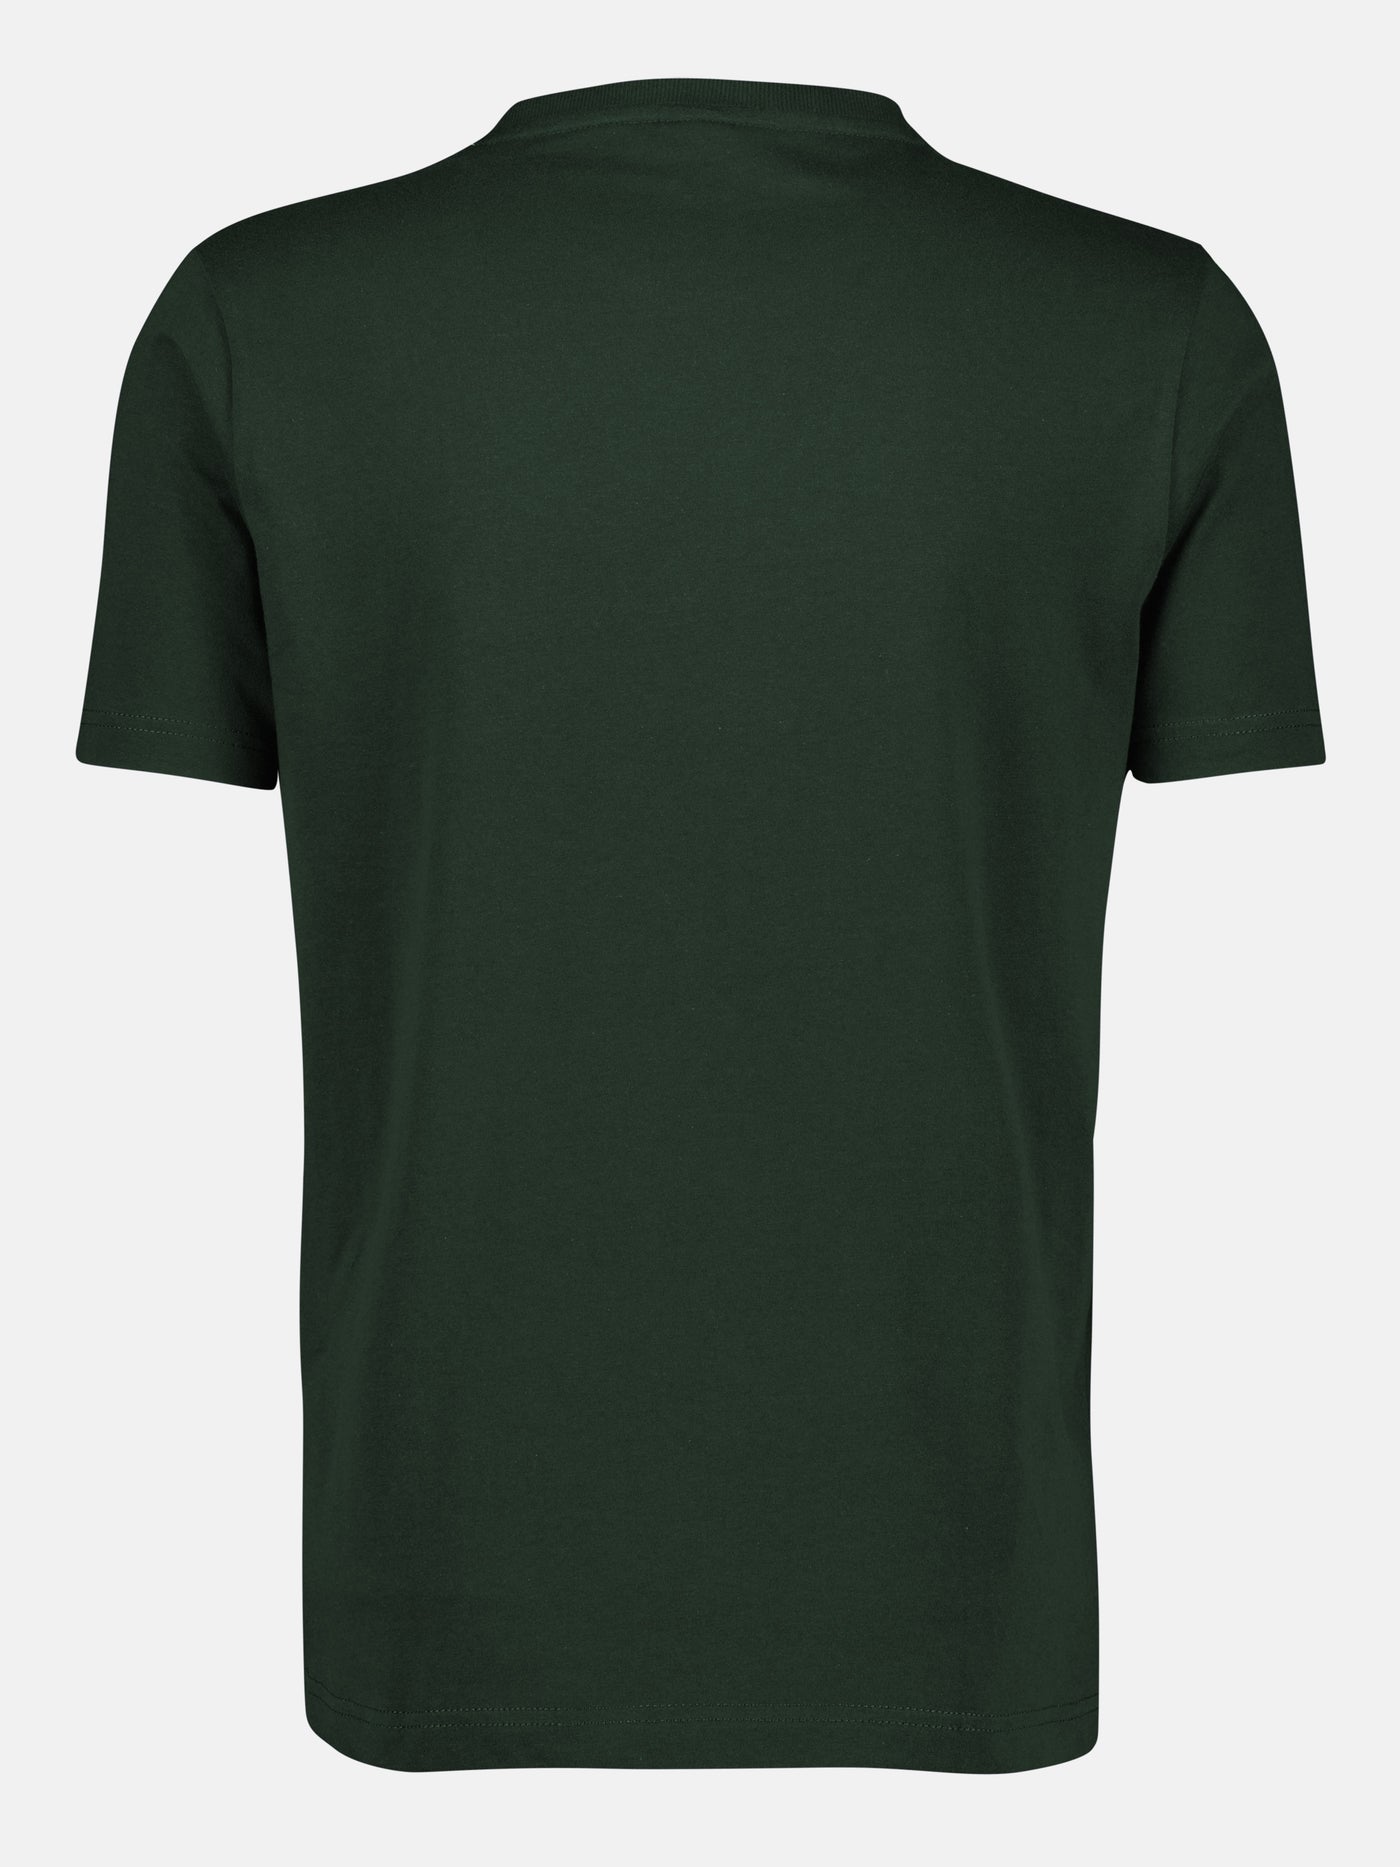 Round neck t-shirt with large logo print